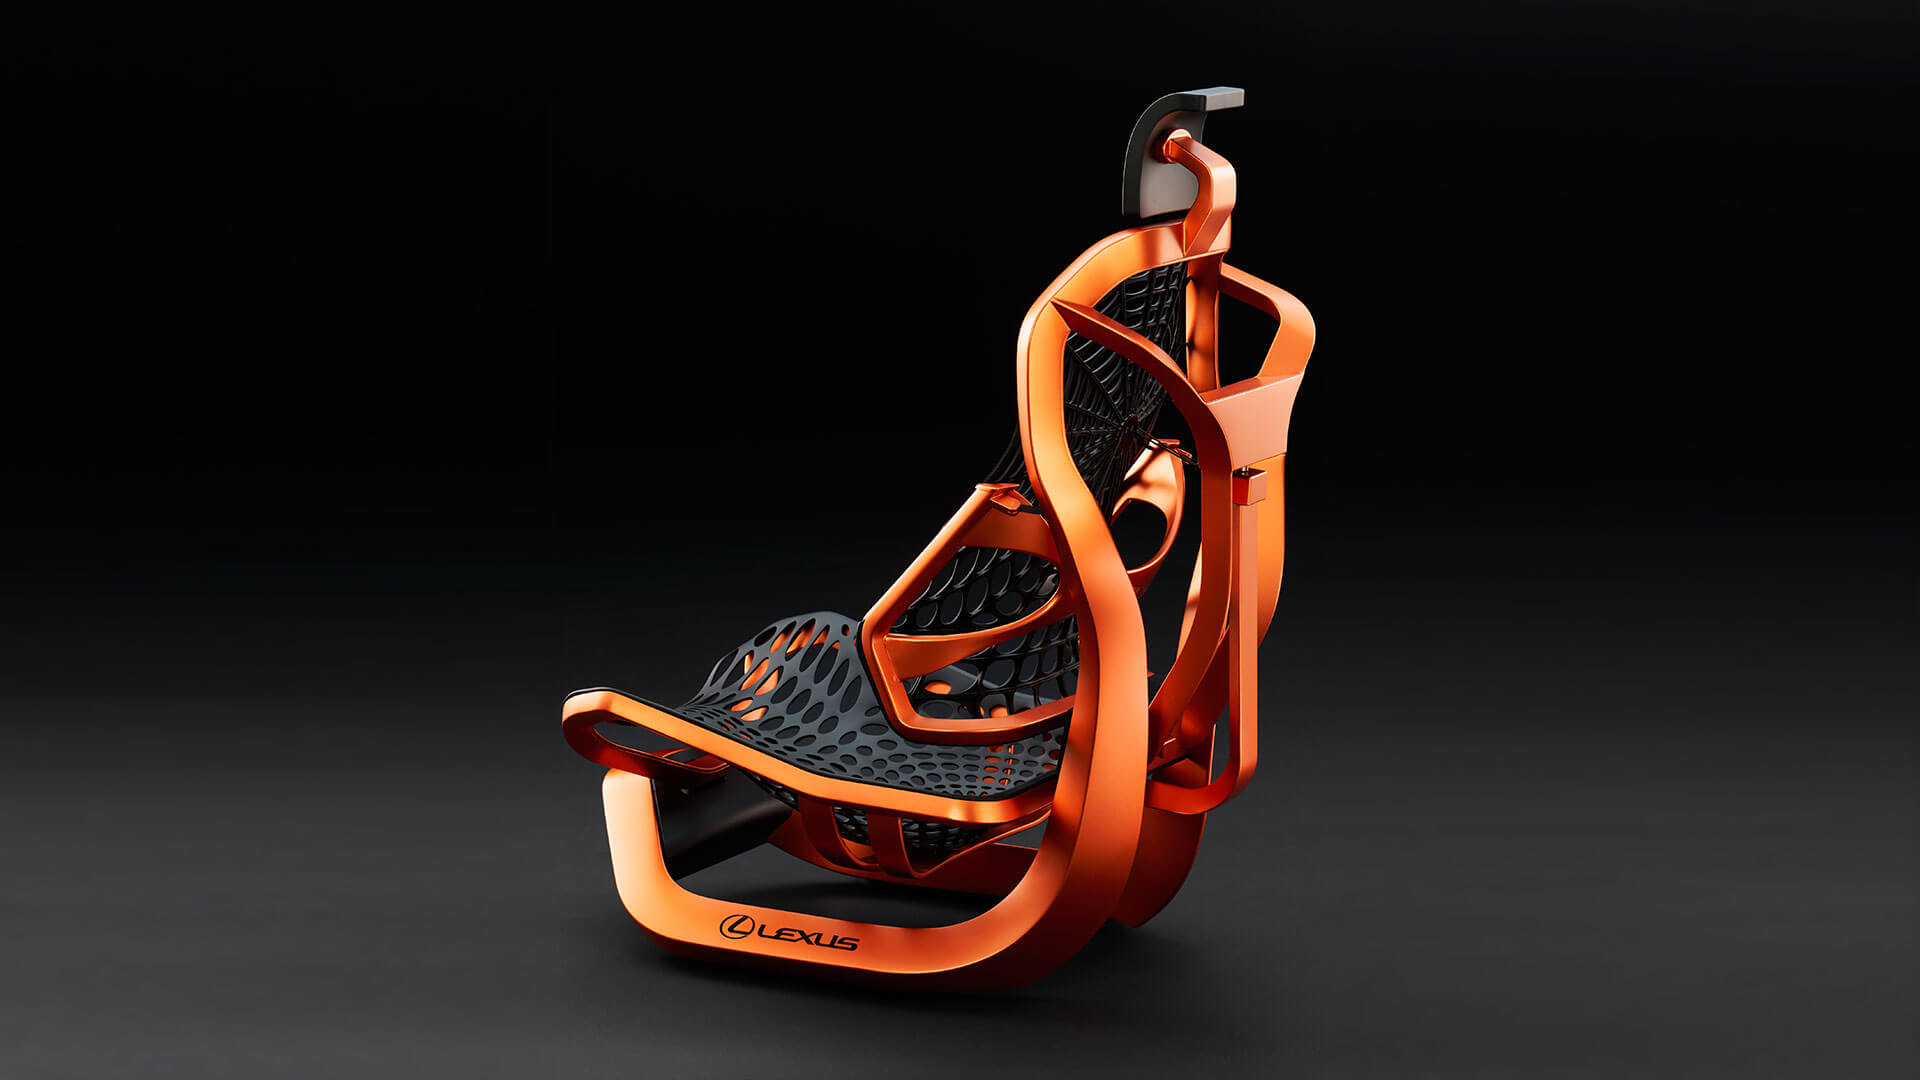 THE KINETIC SEAT CONCEPT